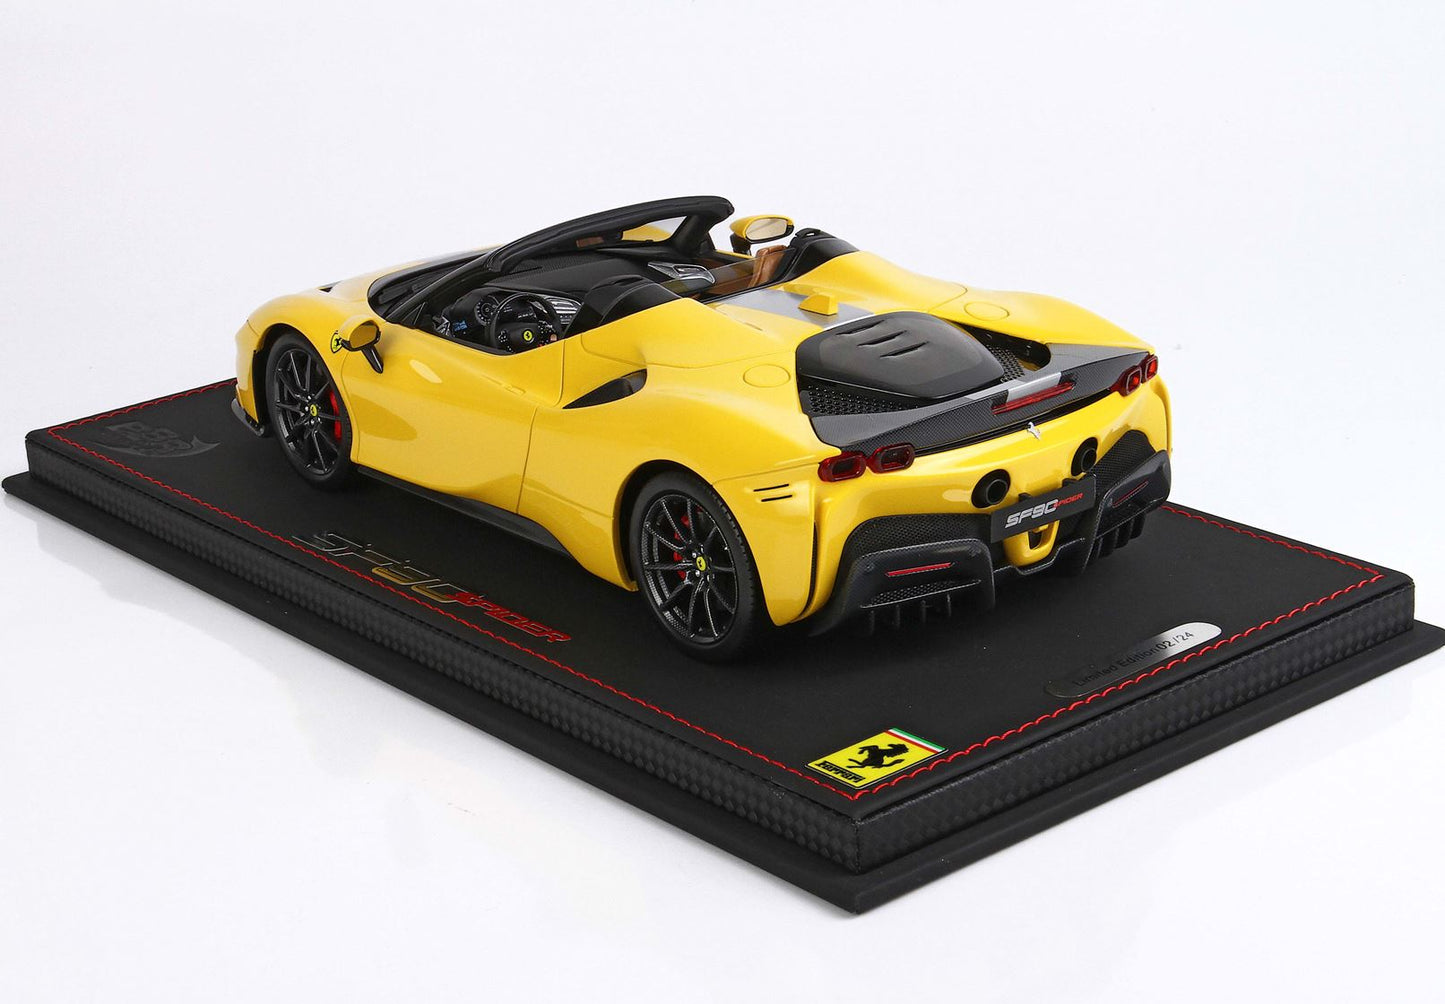 BBR 1/18 Ferrari SF90 Spider PACK FIORANO Giallo Modena with Display Case Limited 24 Pieces